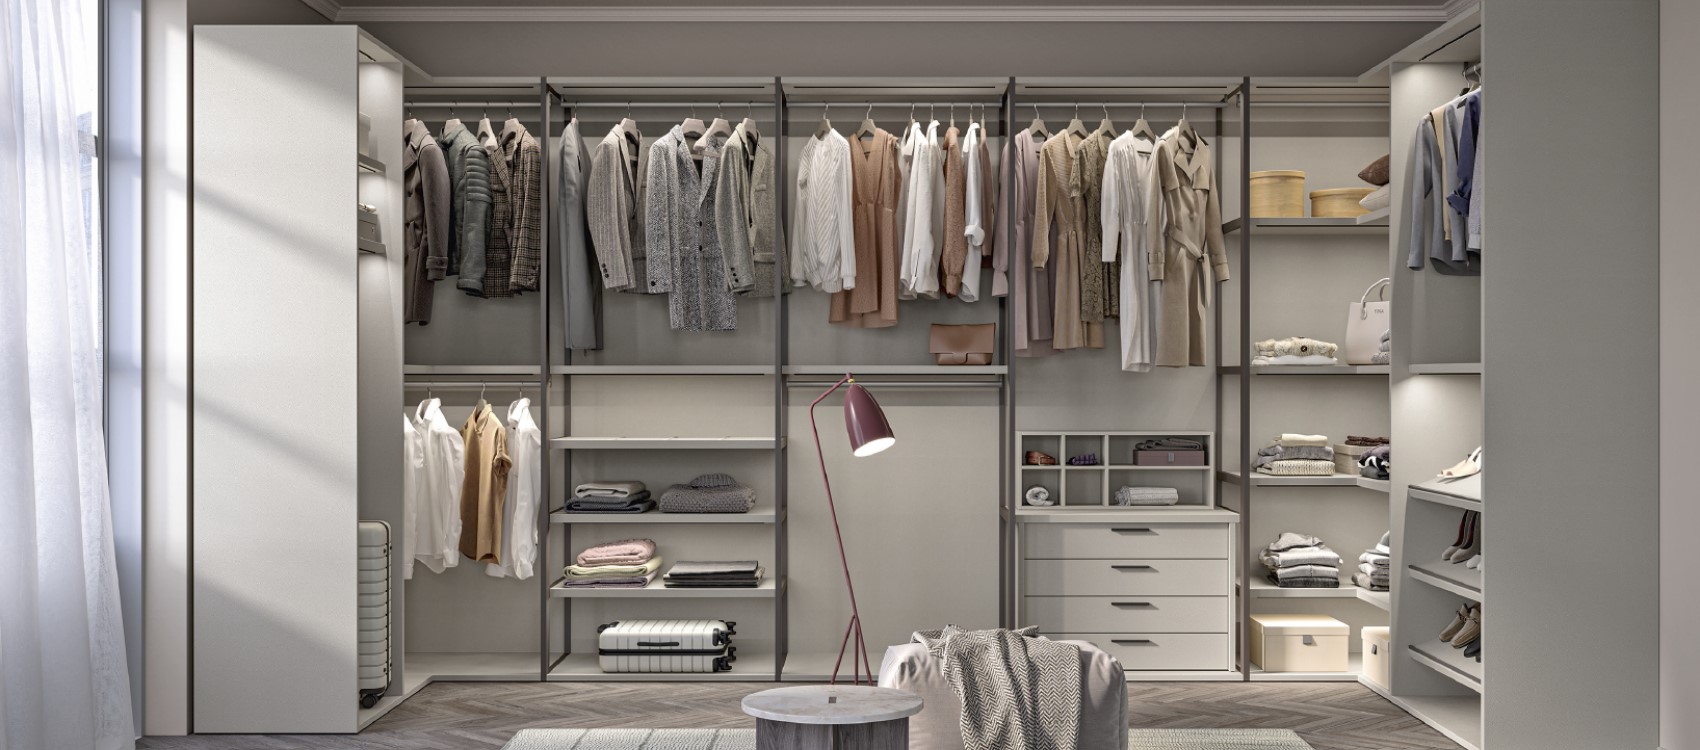 Modular walk in wardrobes by Colombini with open metal dividers between the wardrobes in Leather Grey finish.